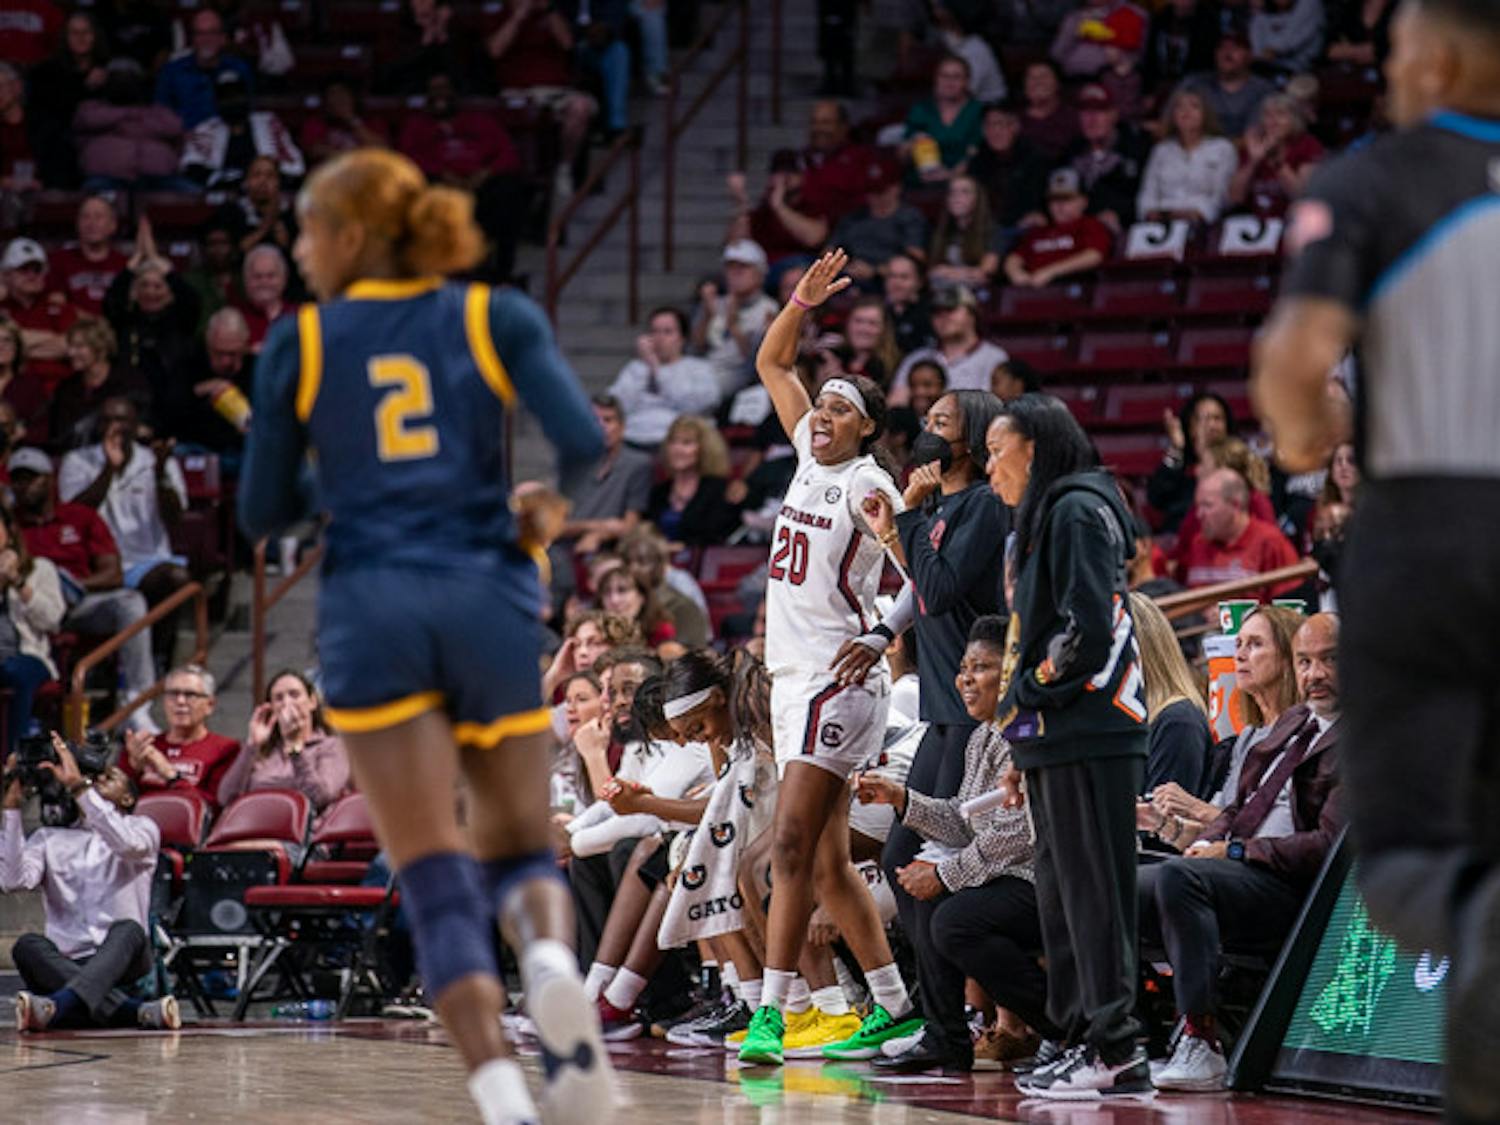 Sophomore Sania Feagin celebrates her teammate on the bench with her team. South Carolina beat East Tennessee State 101-31 on Nov. 7, 2022.